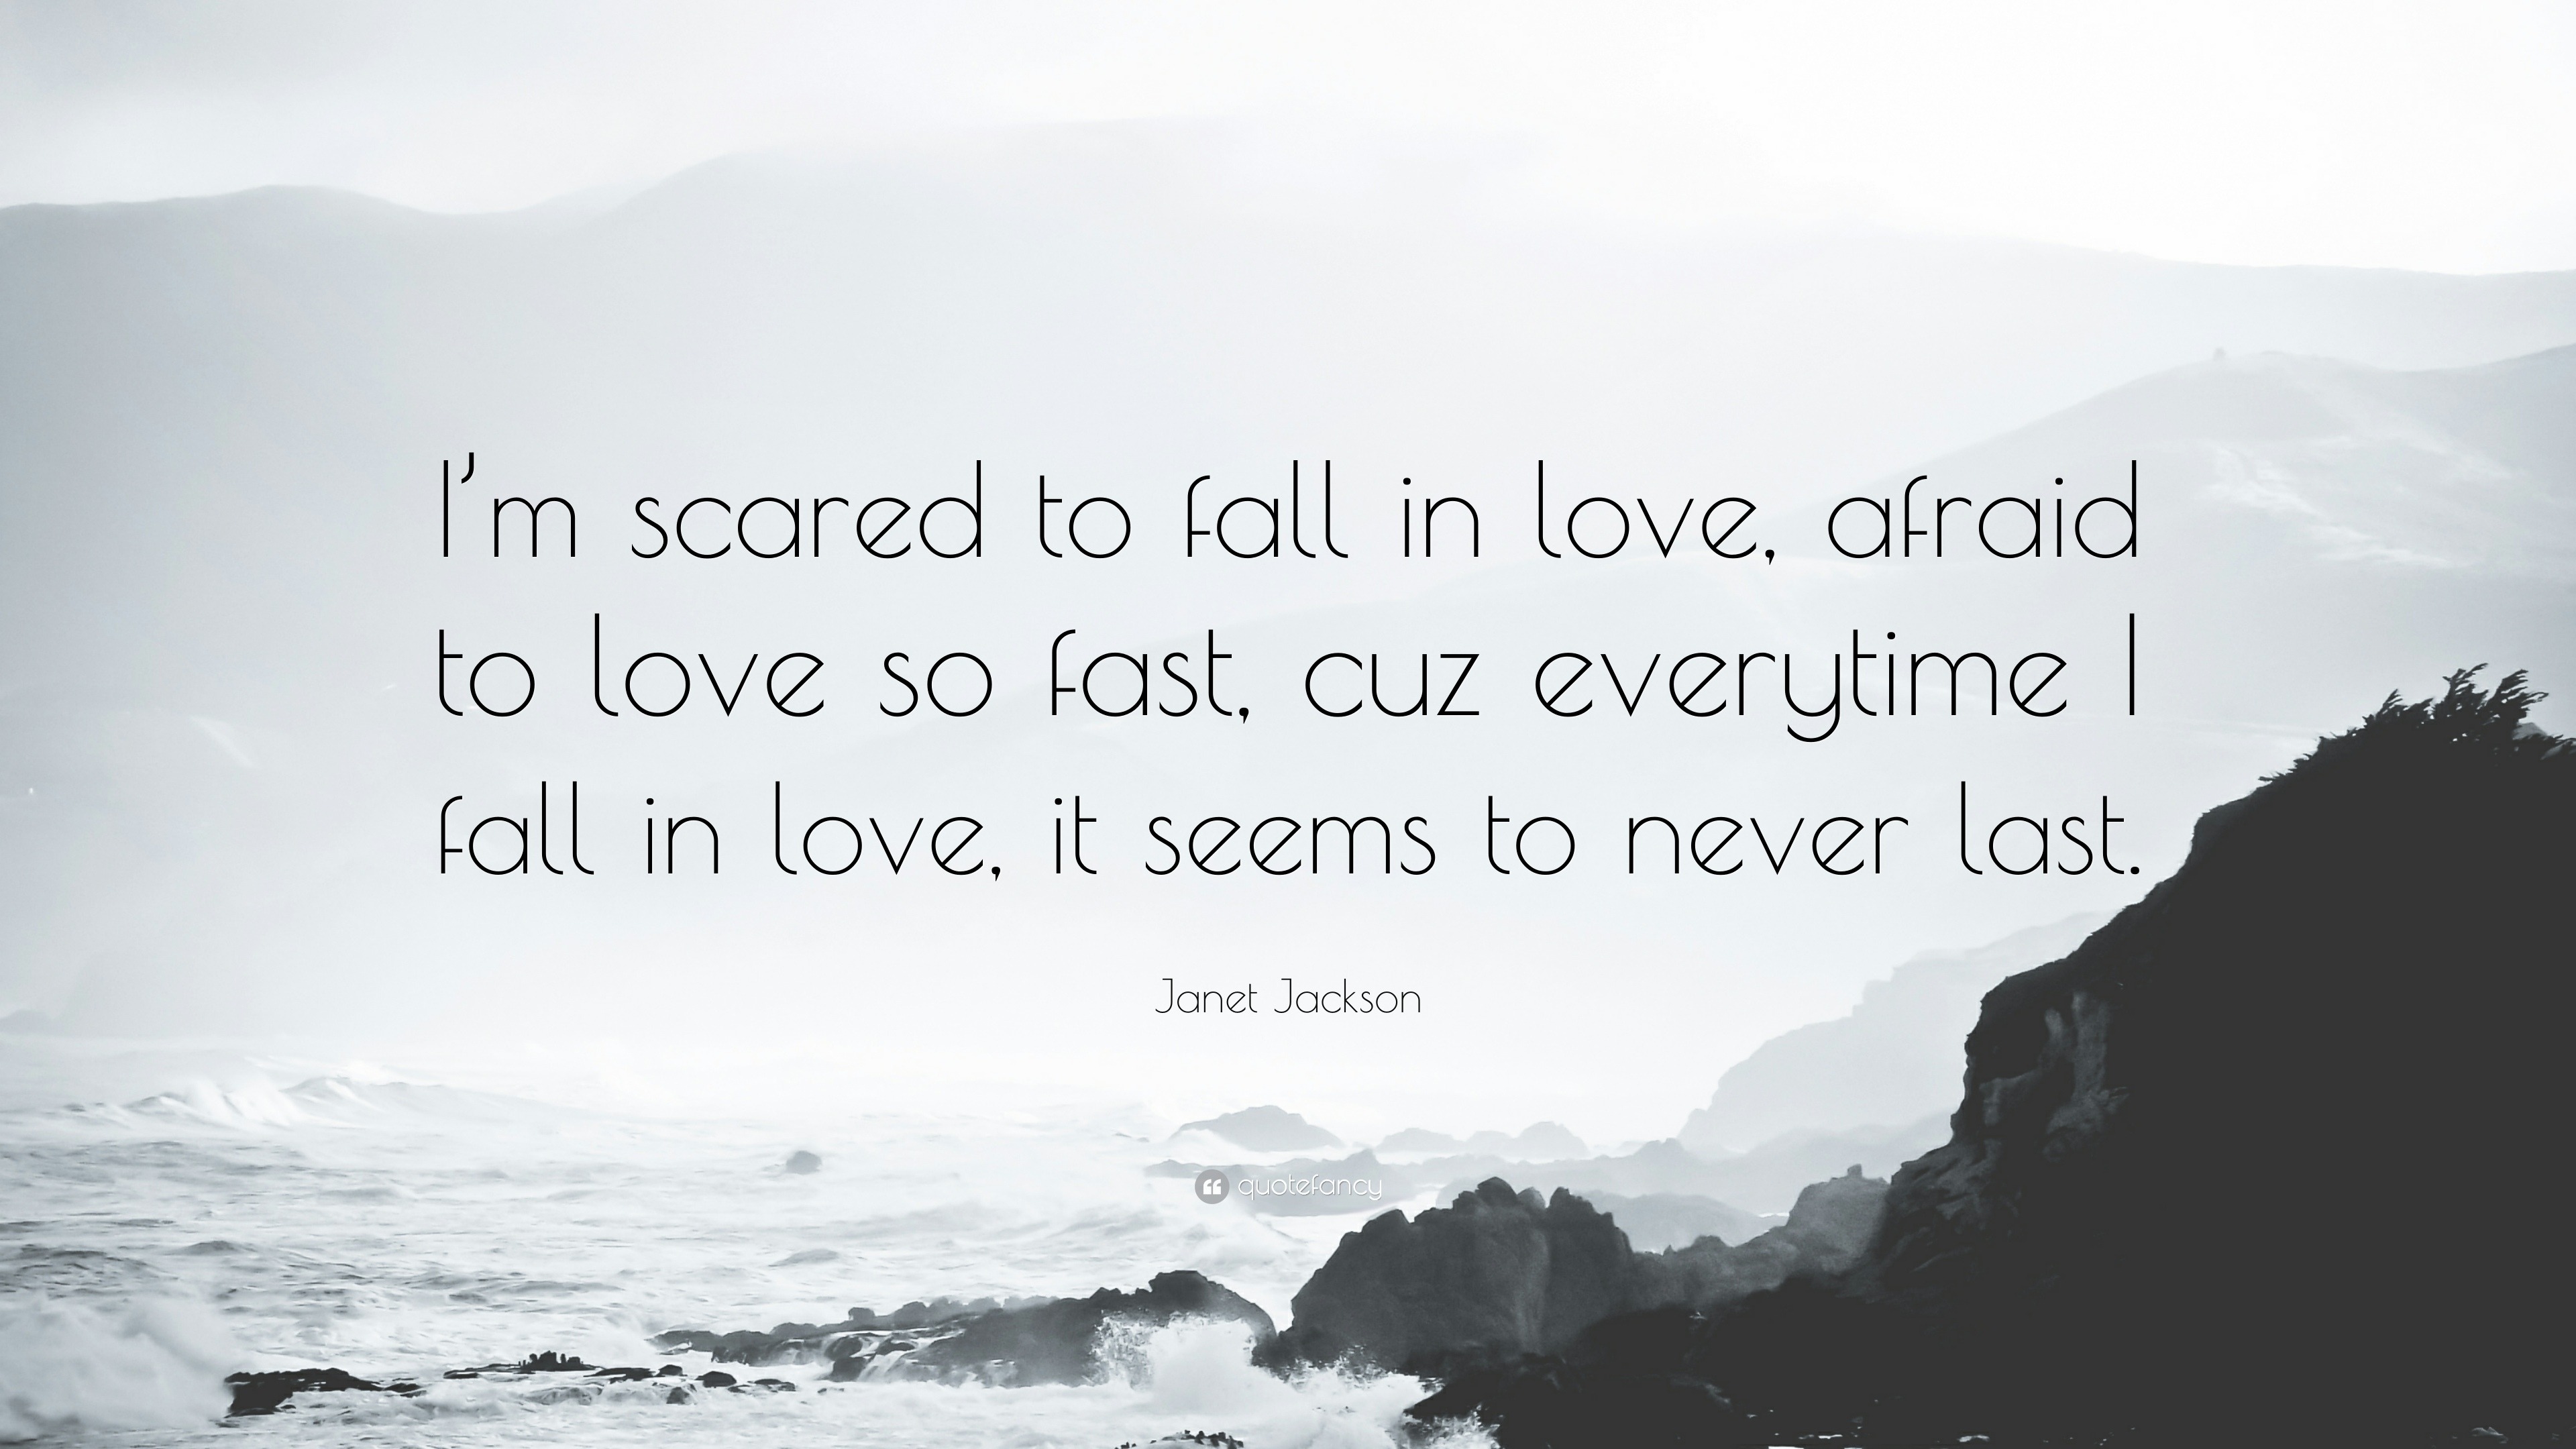 Janet Jackson Quote: “I'm scared to fall in love, afraid to love